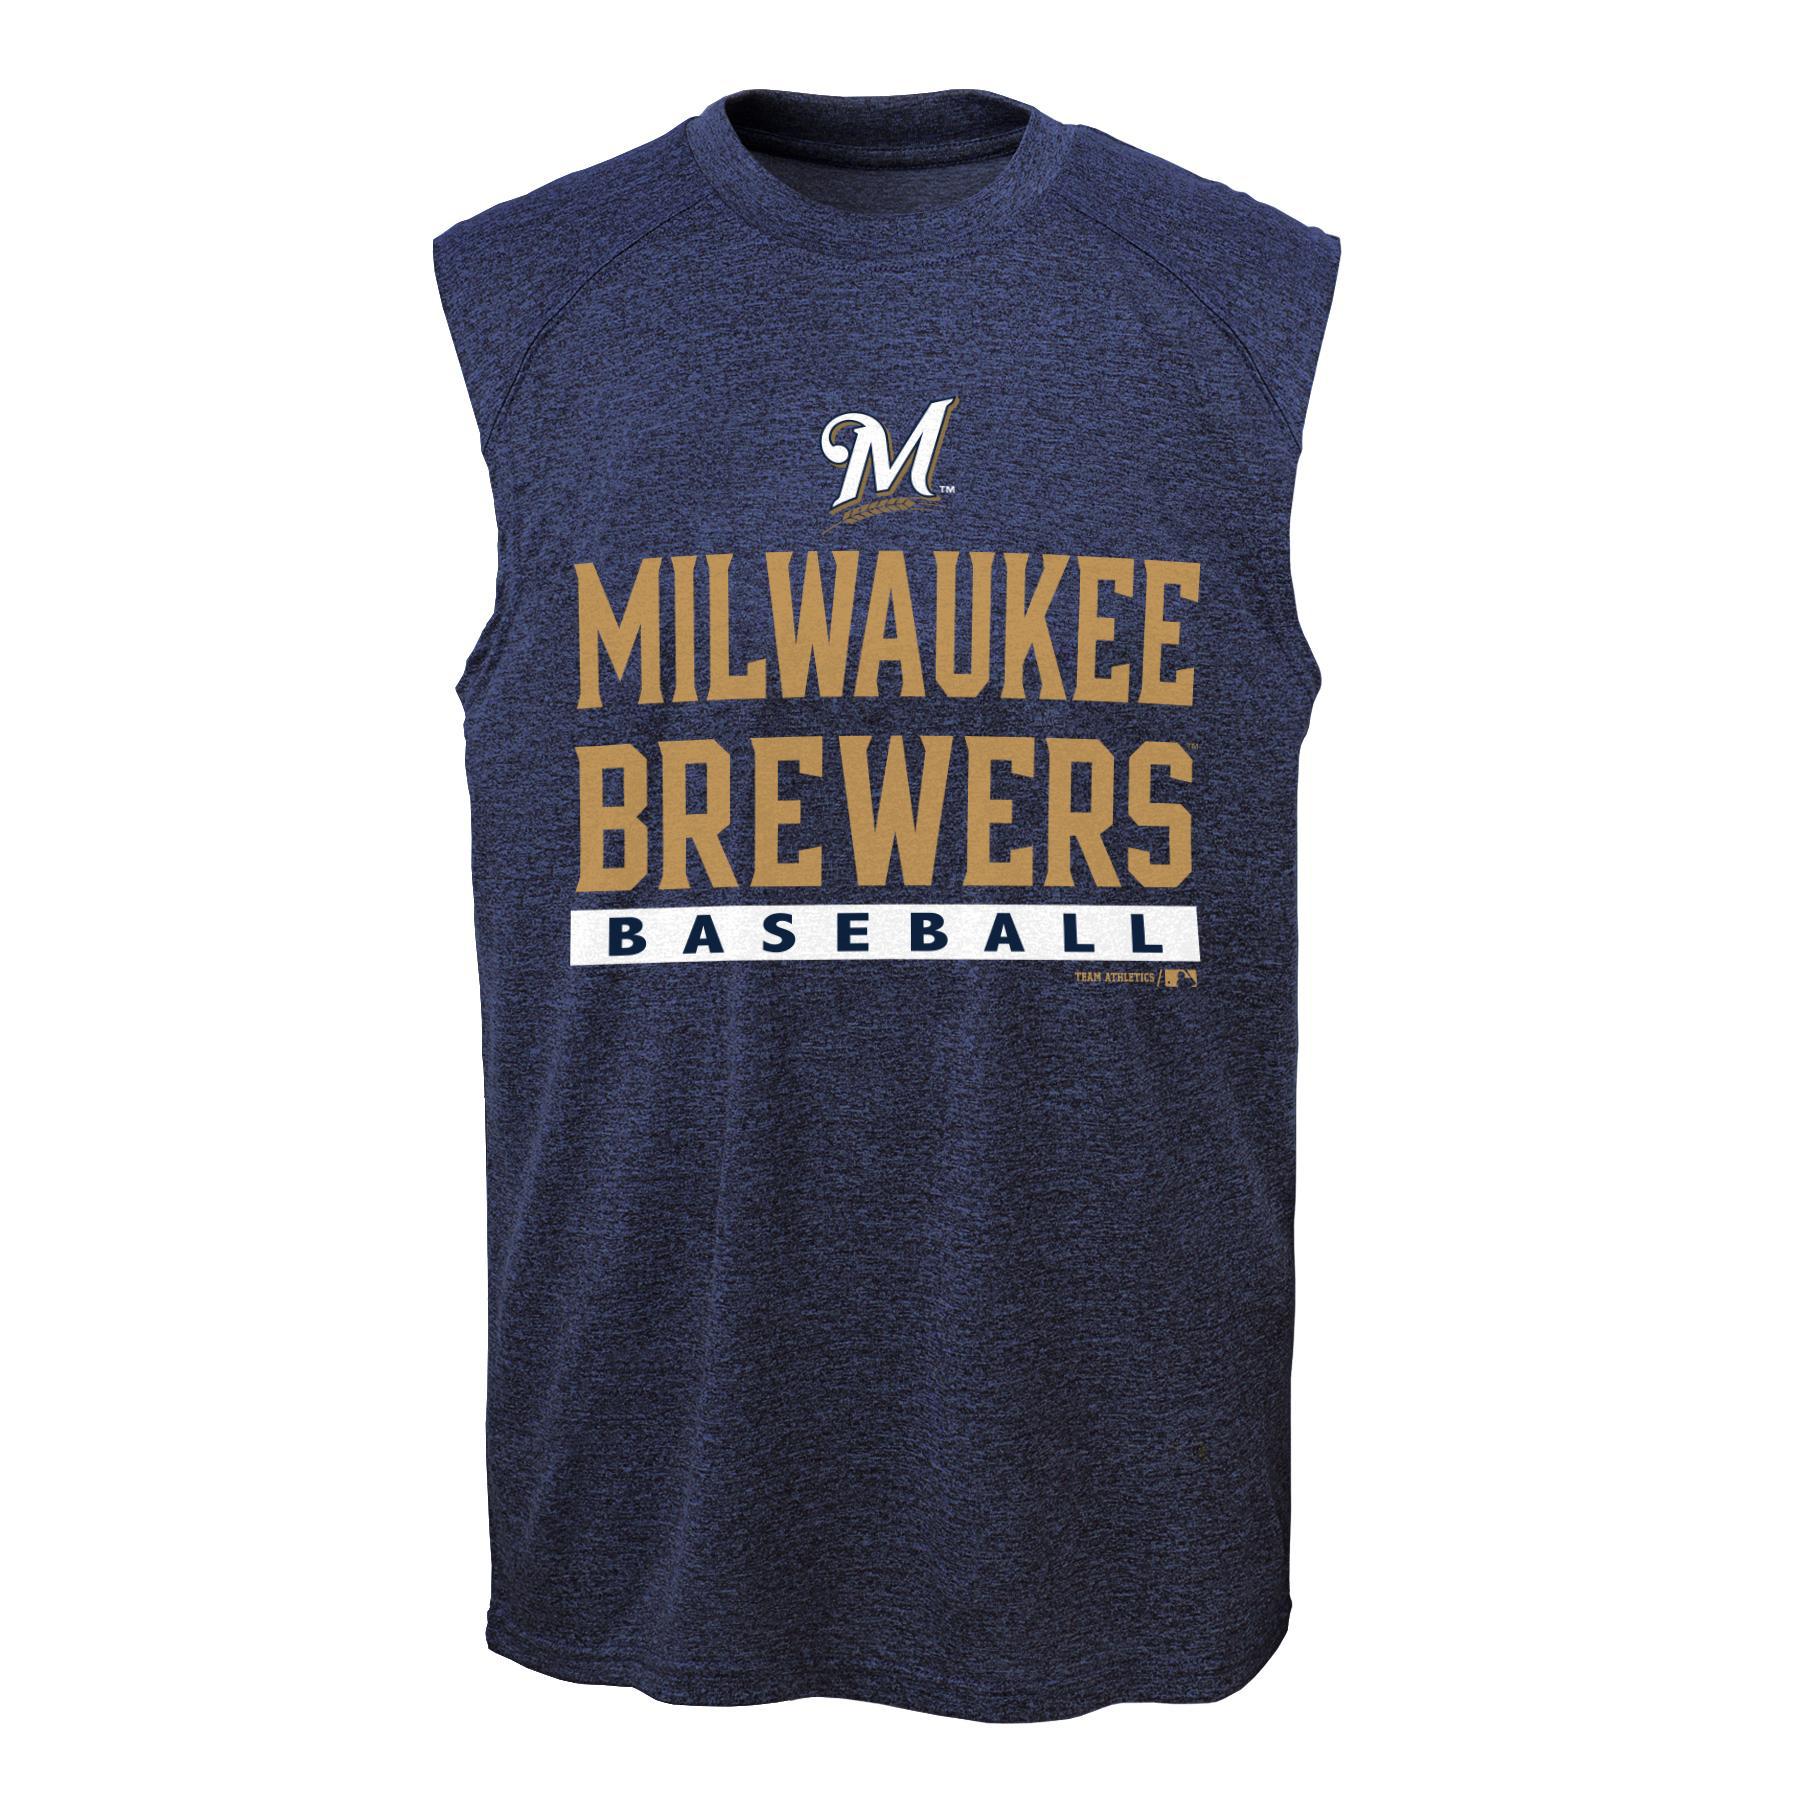 MLB Boy's Graphic Muscle Shirt - Milwaukee Brewers